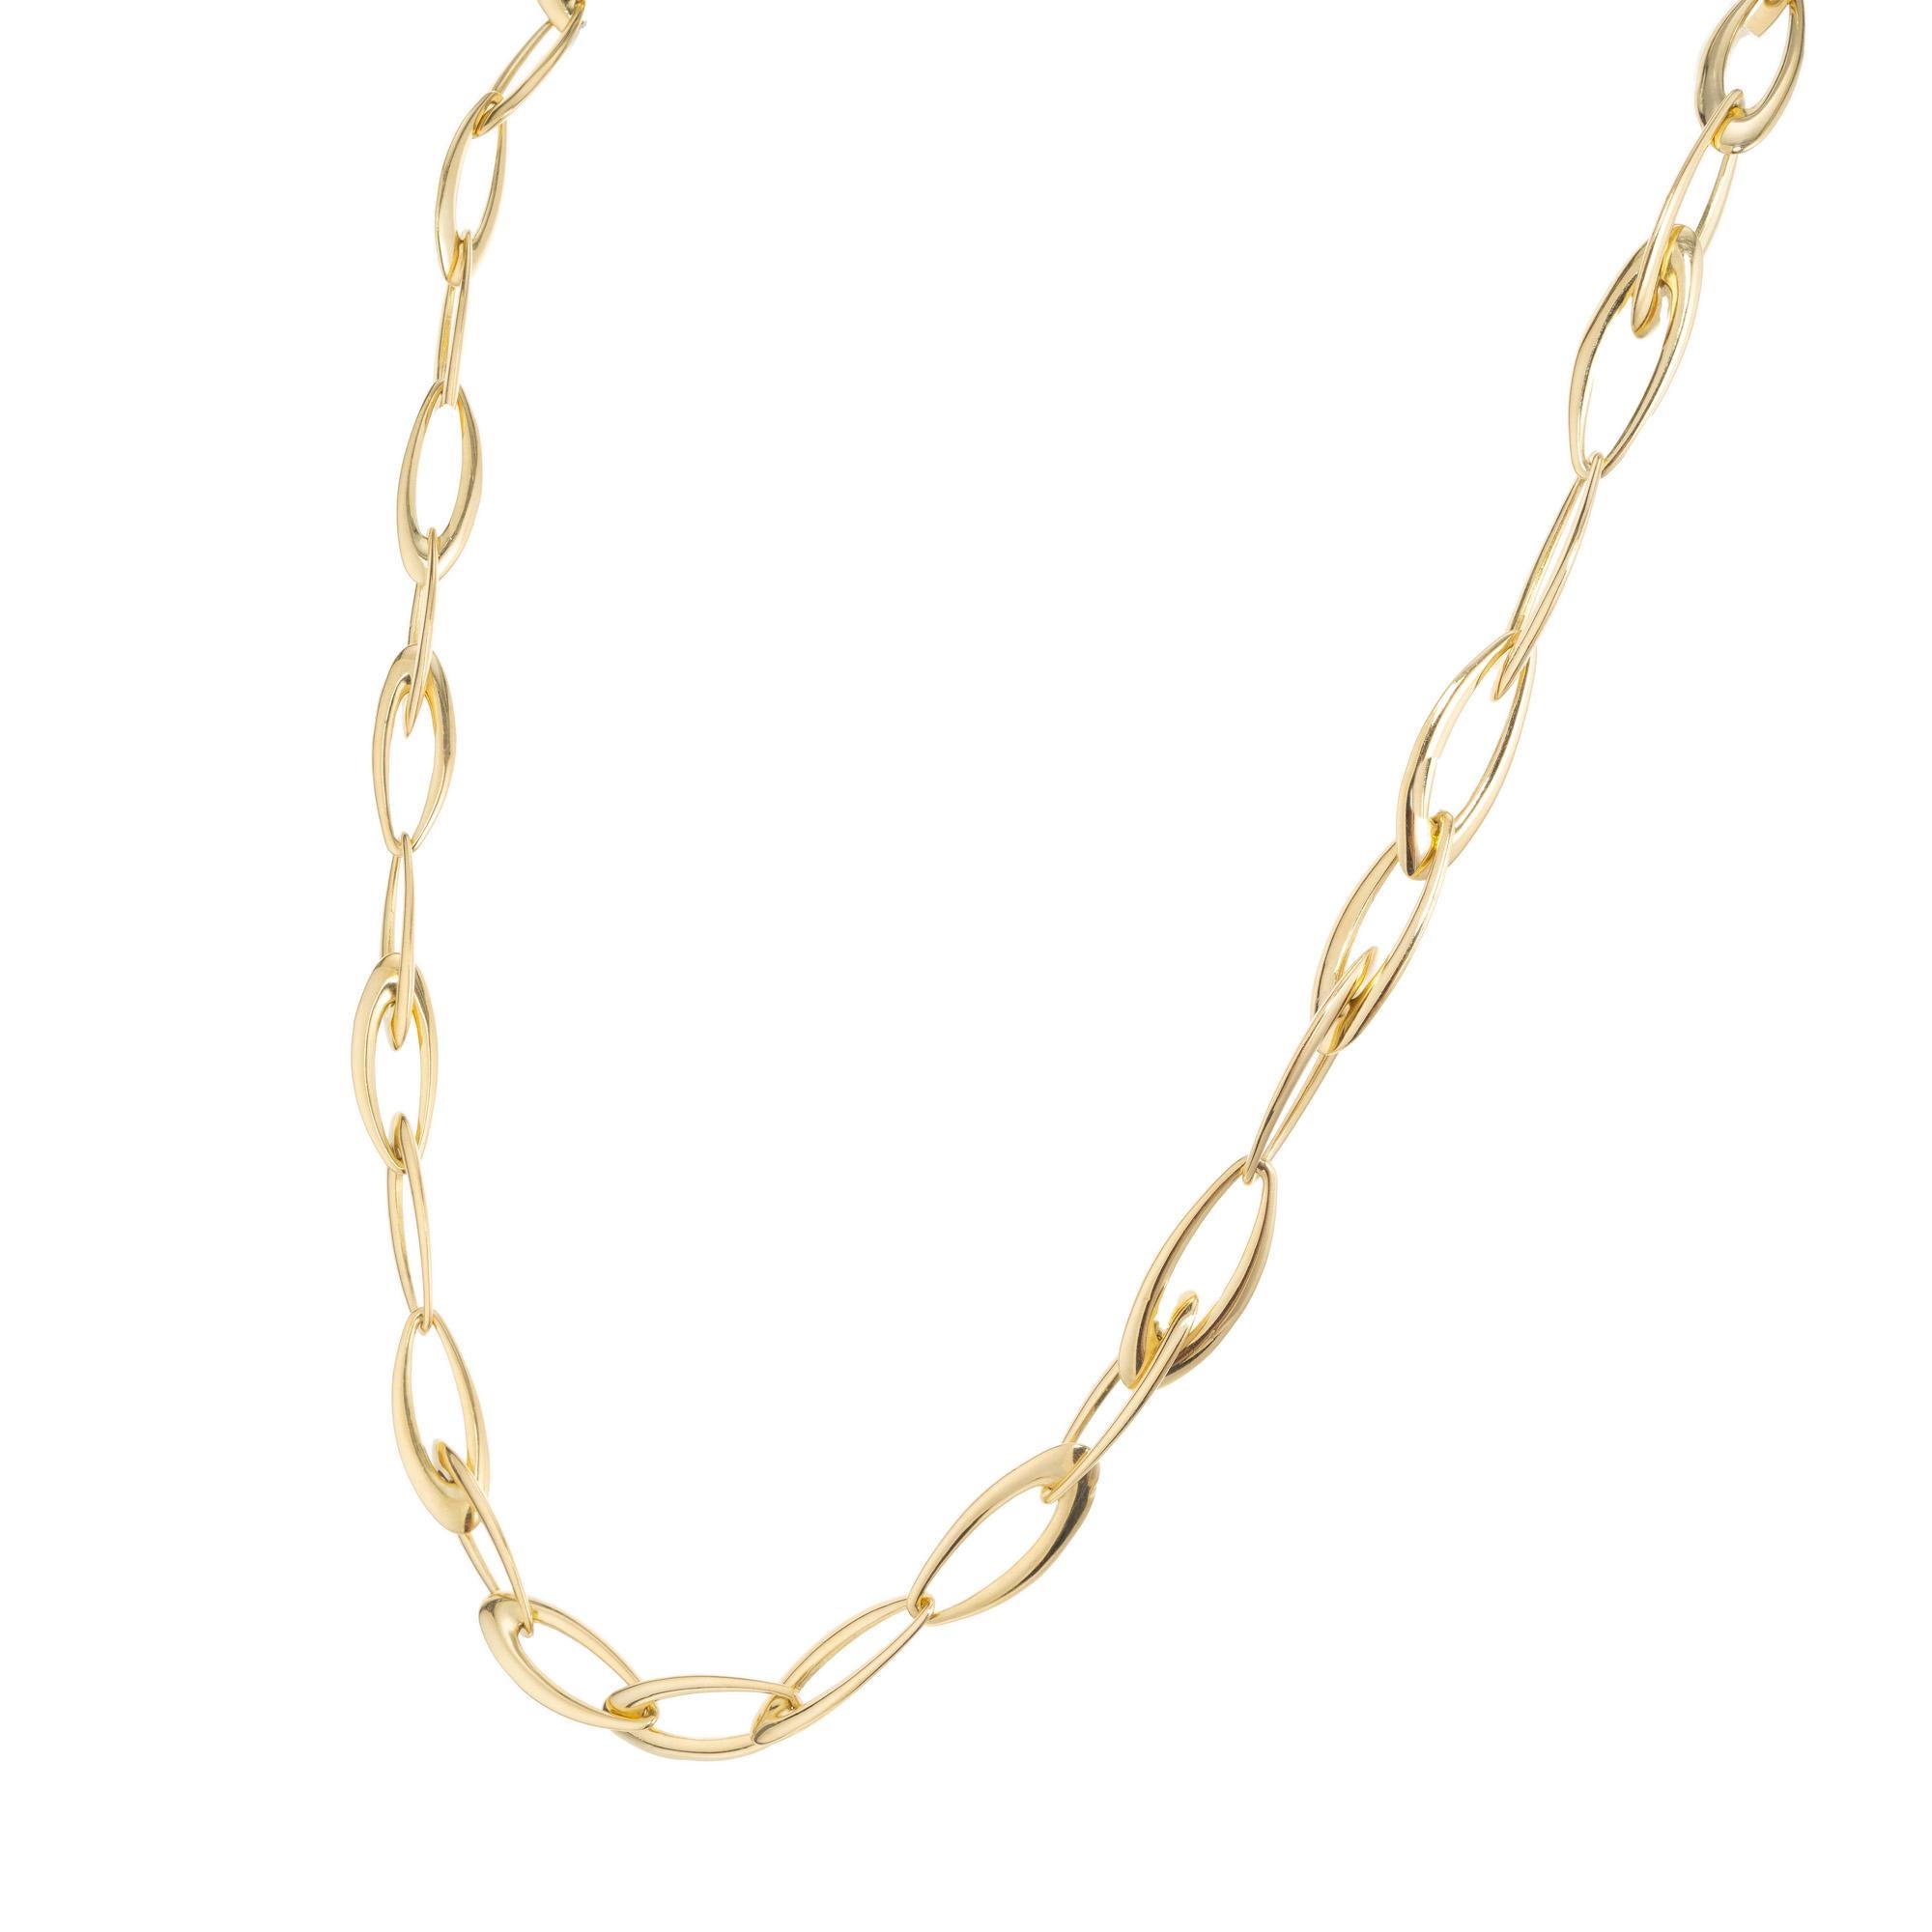 Superoro 18k Yellow Gold Fancy Oval Link Necklace In Good Condition For Sale In Stamford, CT